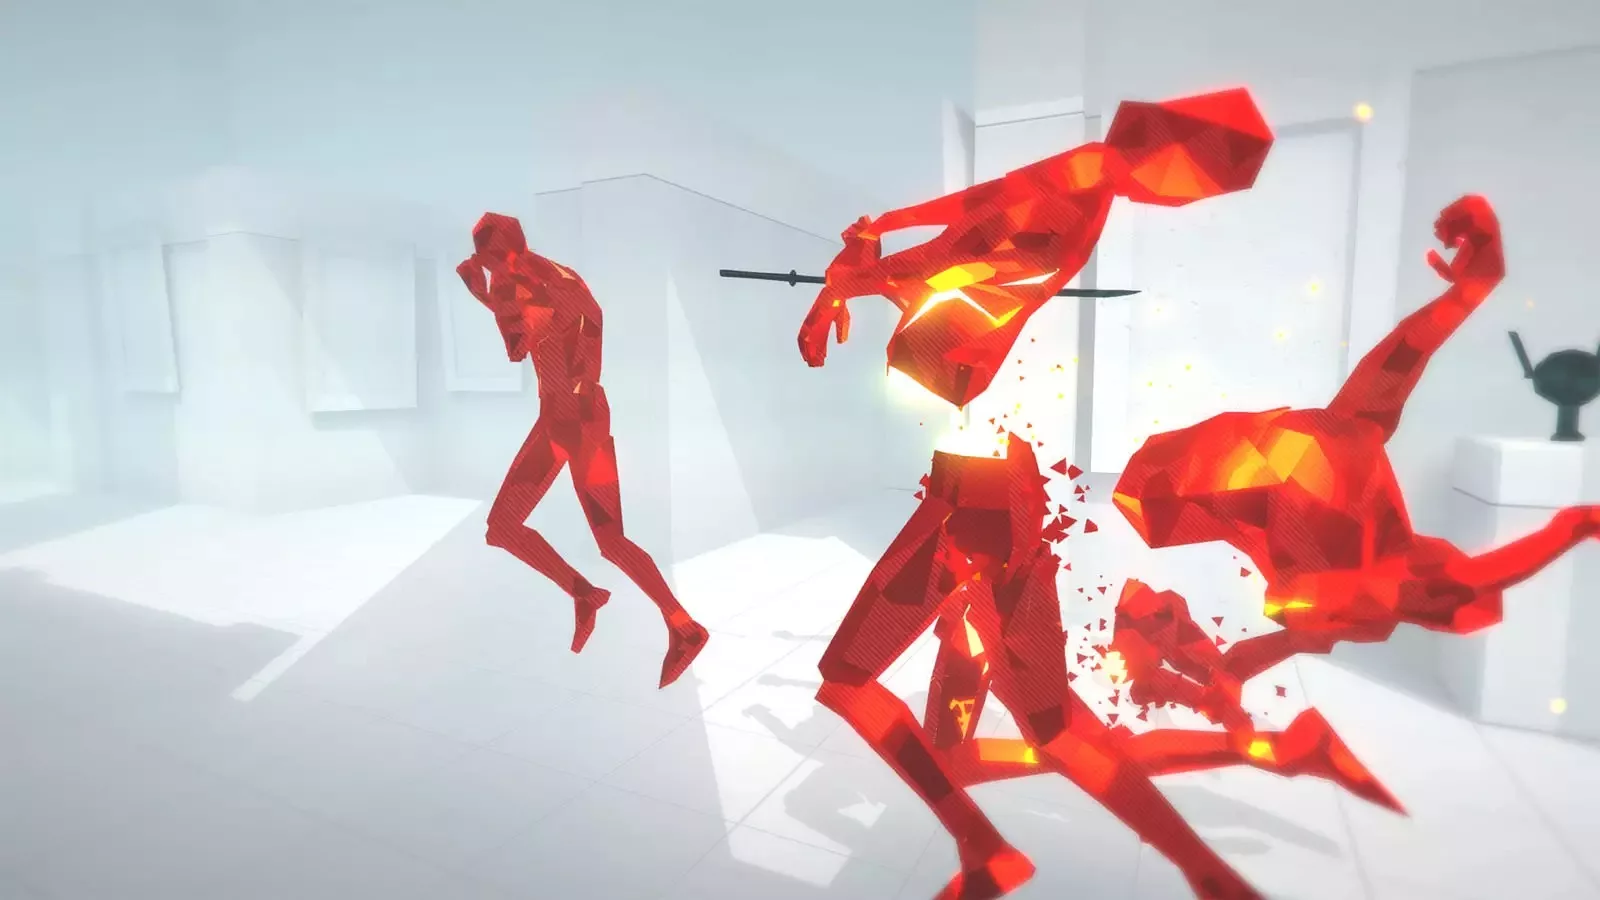 Polygonal red humanoids on a white background, with one cut in half by a sword.